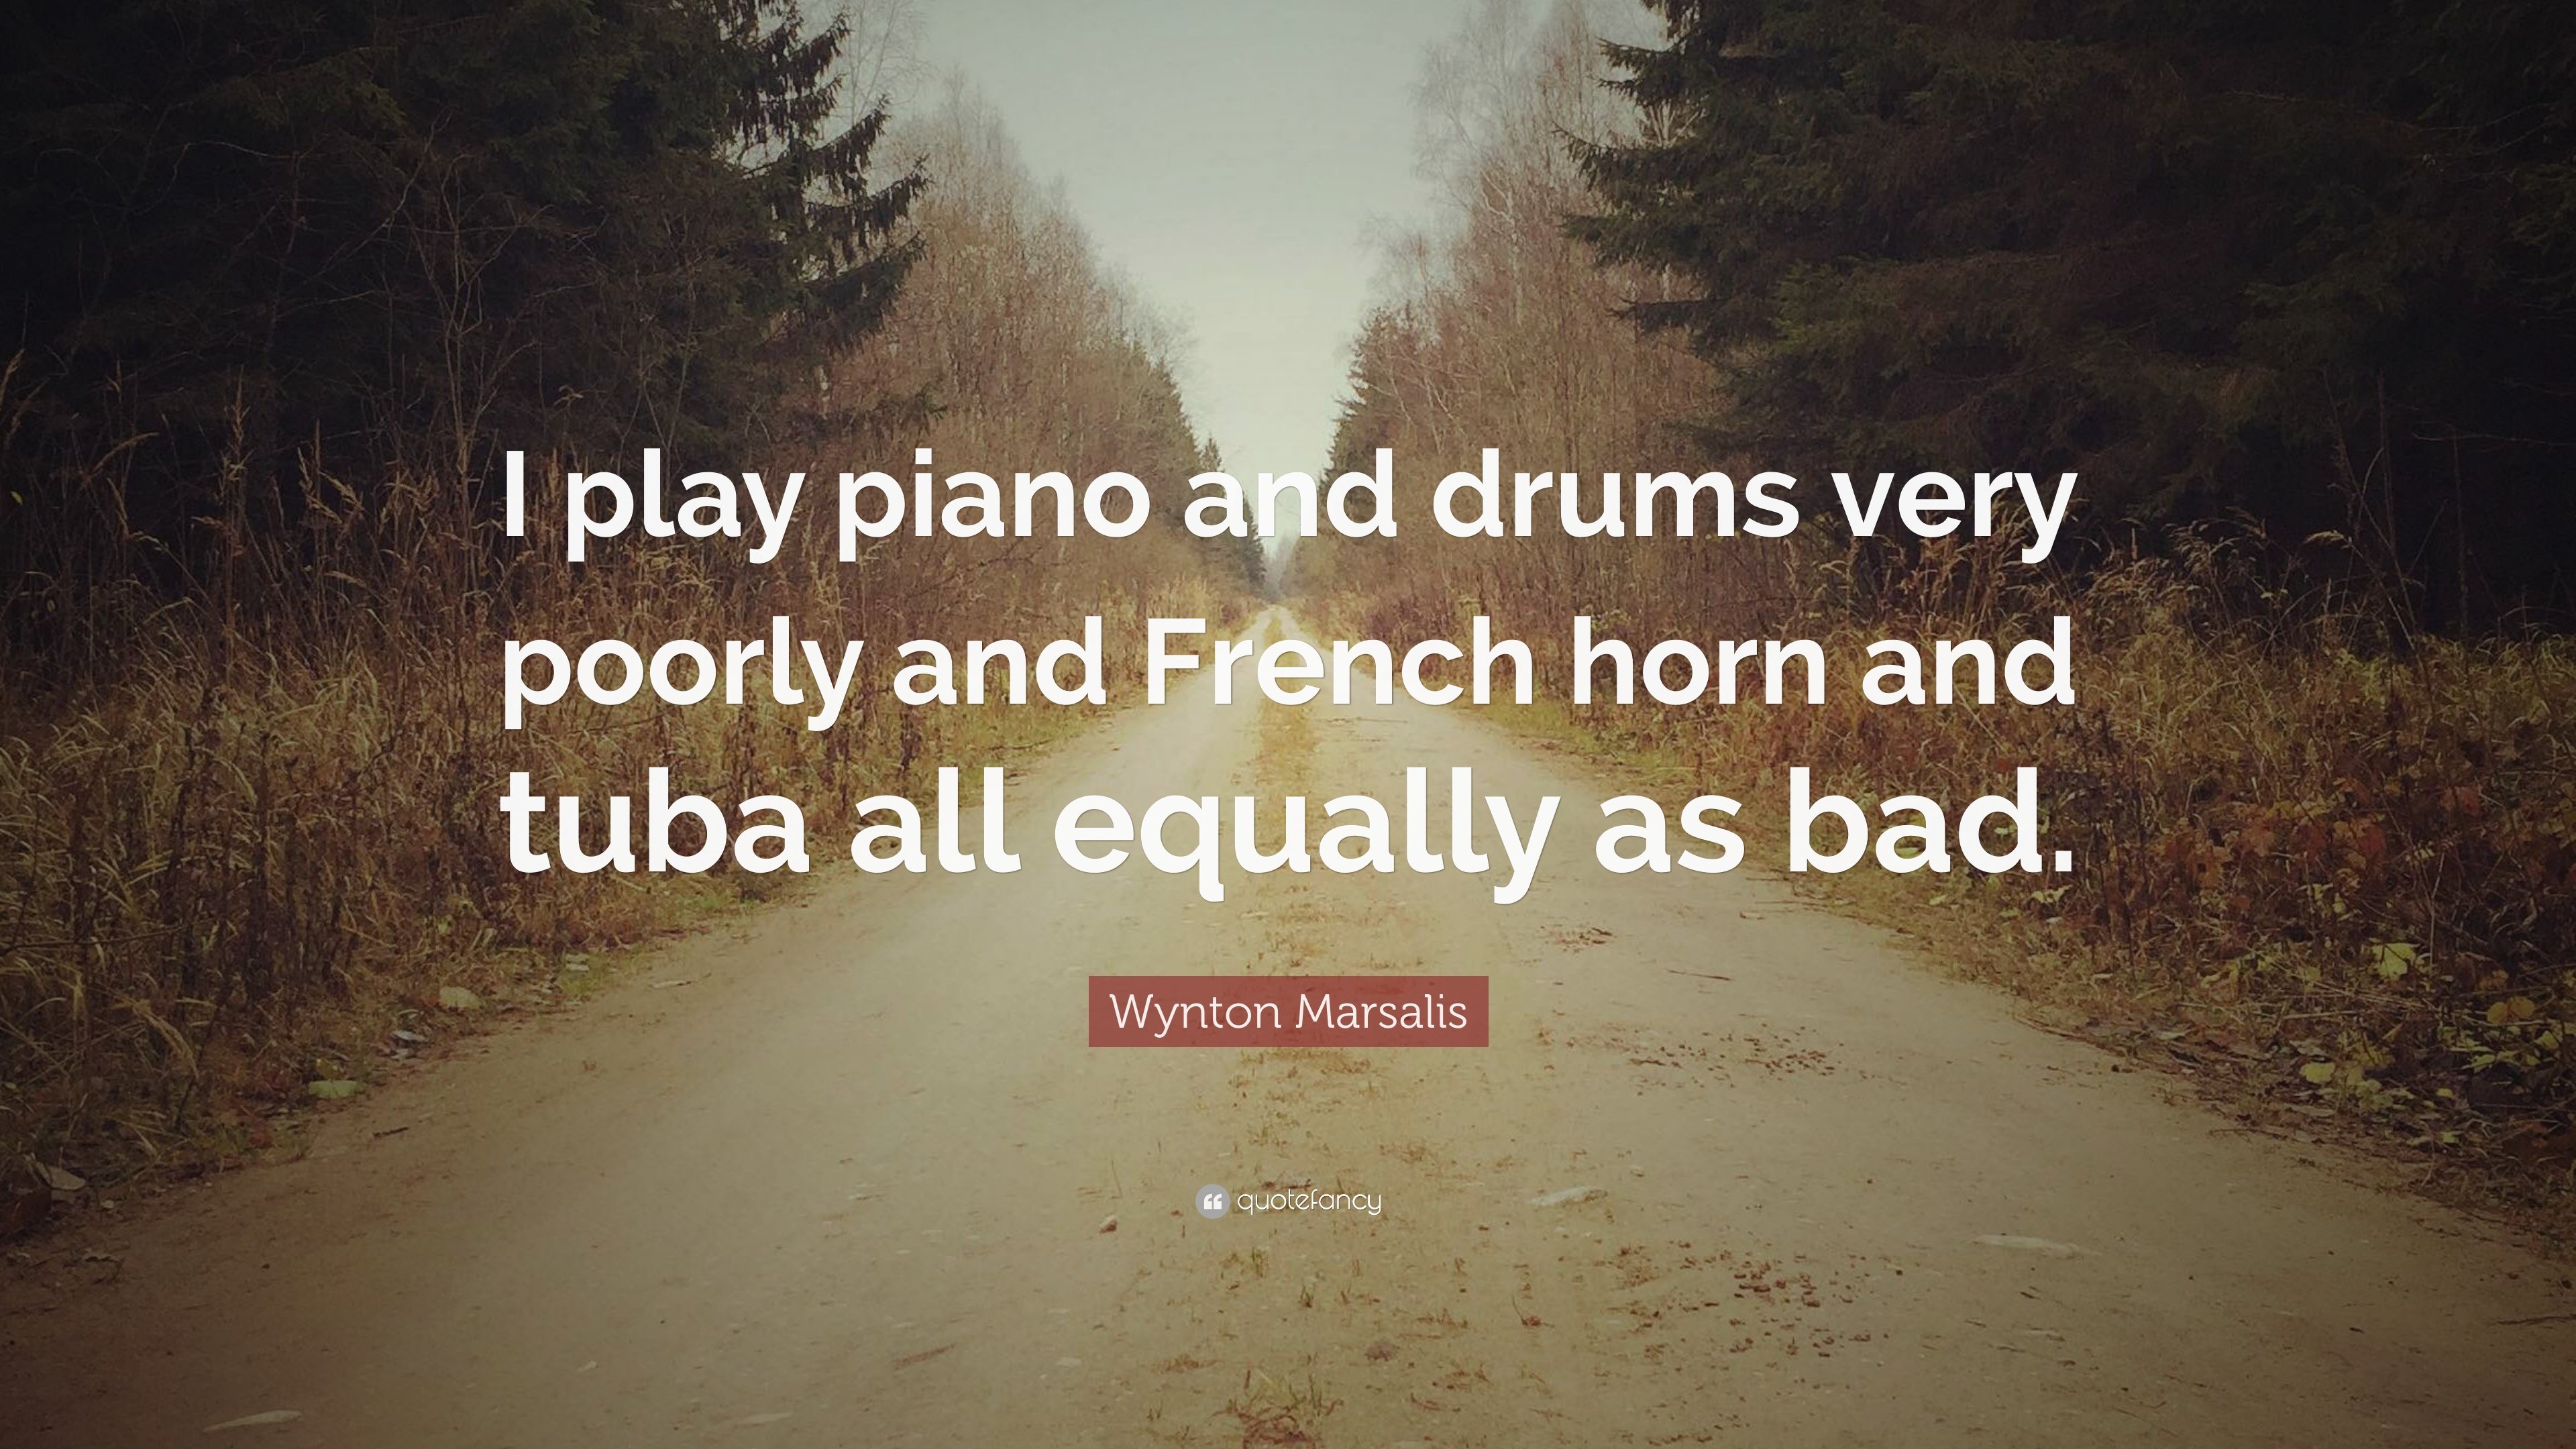 Wynton Marsalis Quote: “I play piano and drums very poorly